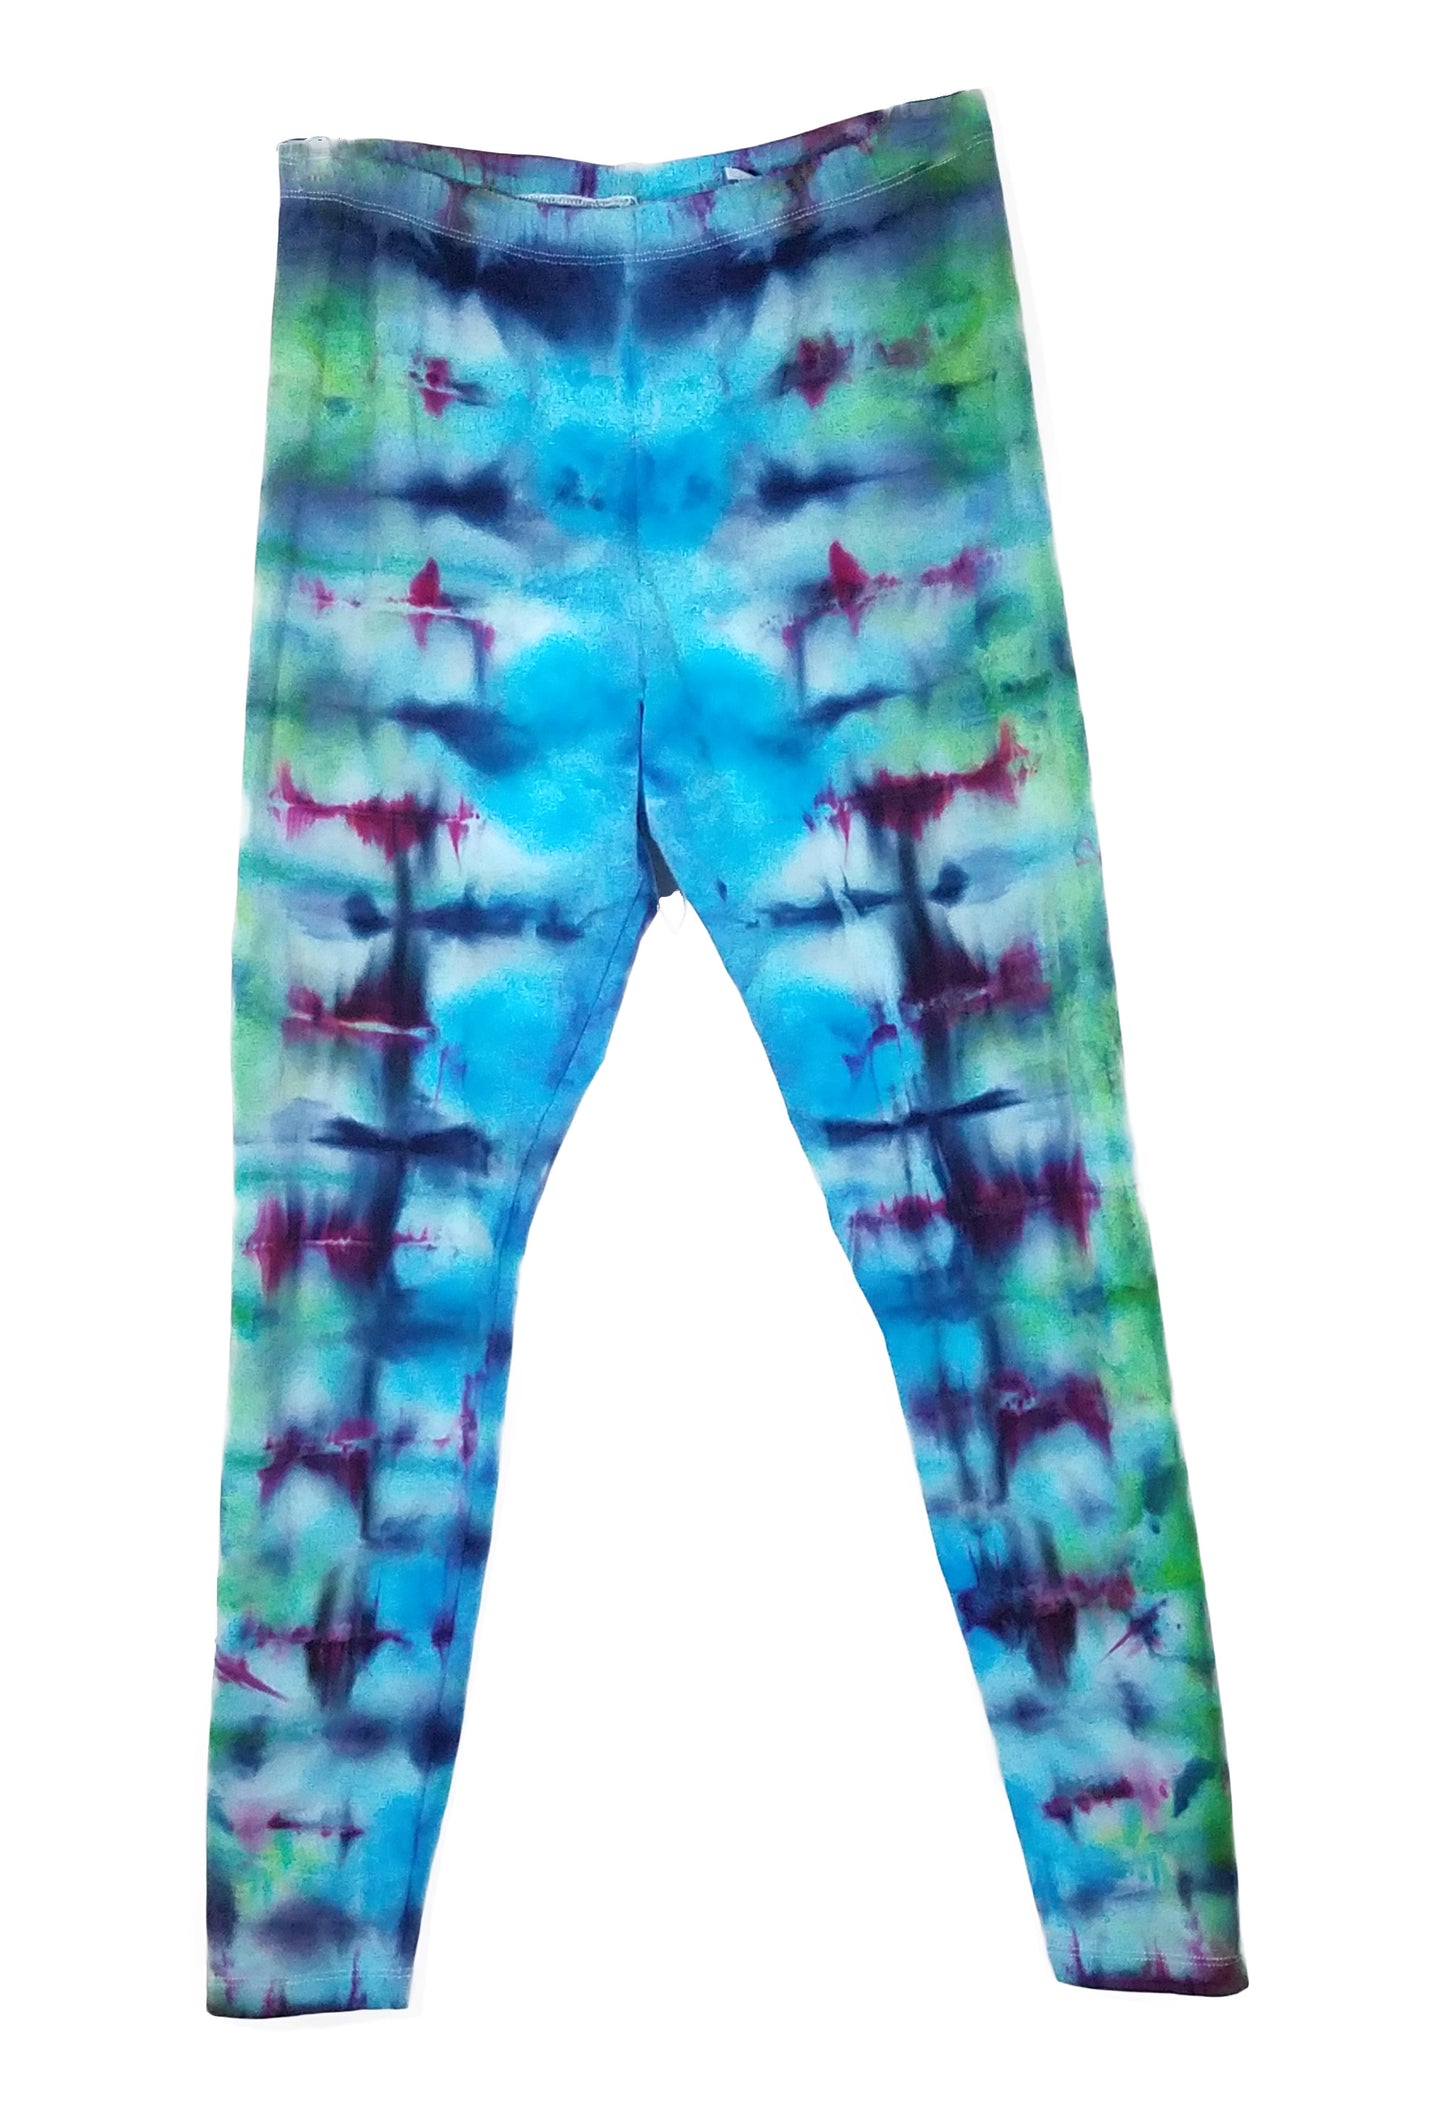 SOLD! Leggings: Green and Purple Tie-Dyed size Large